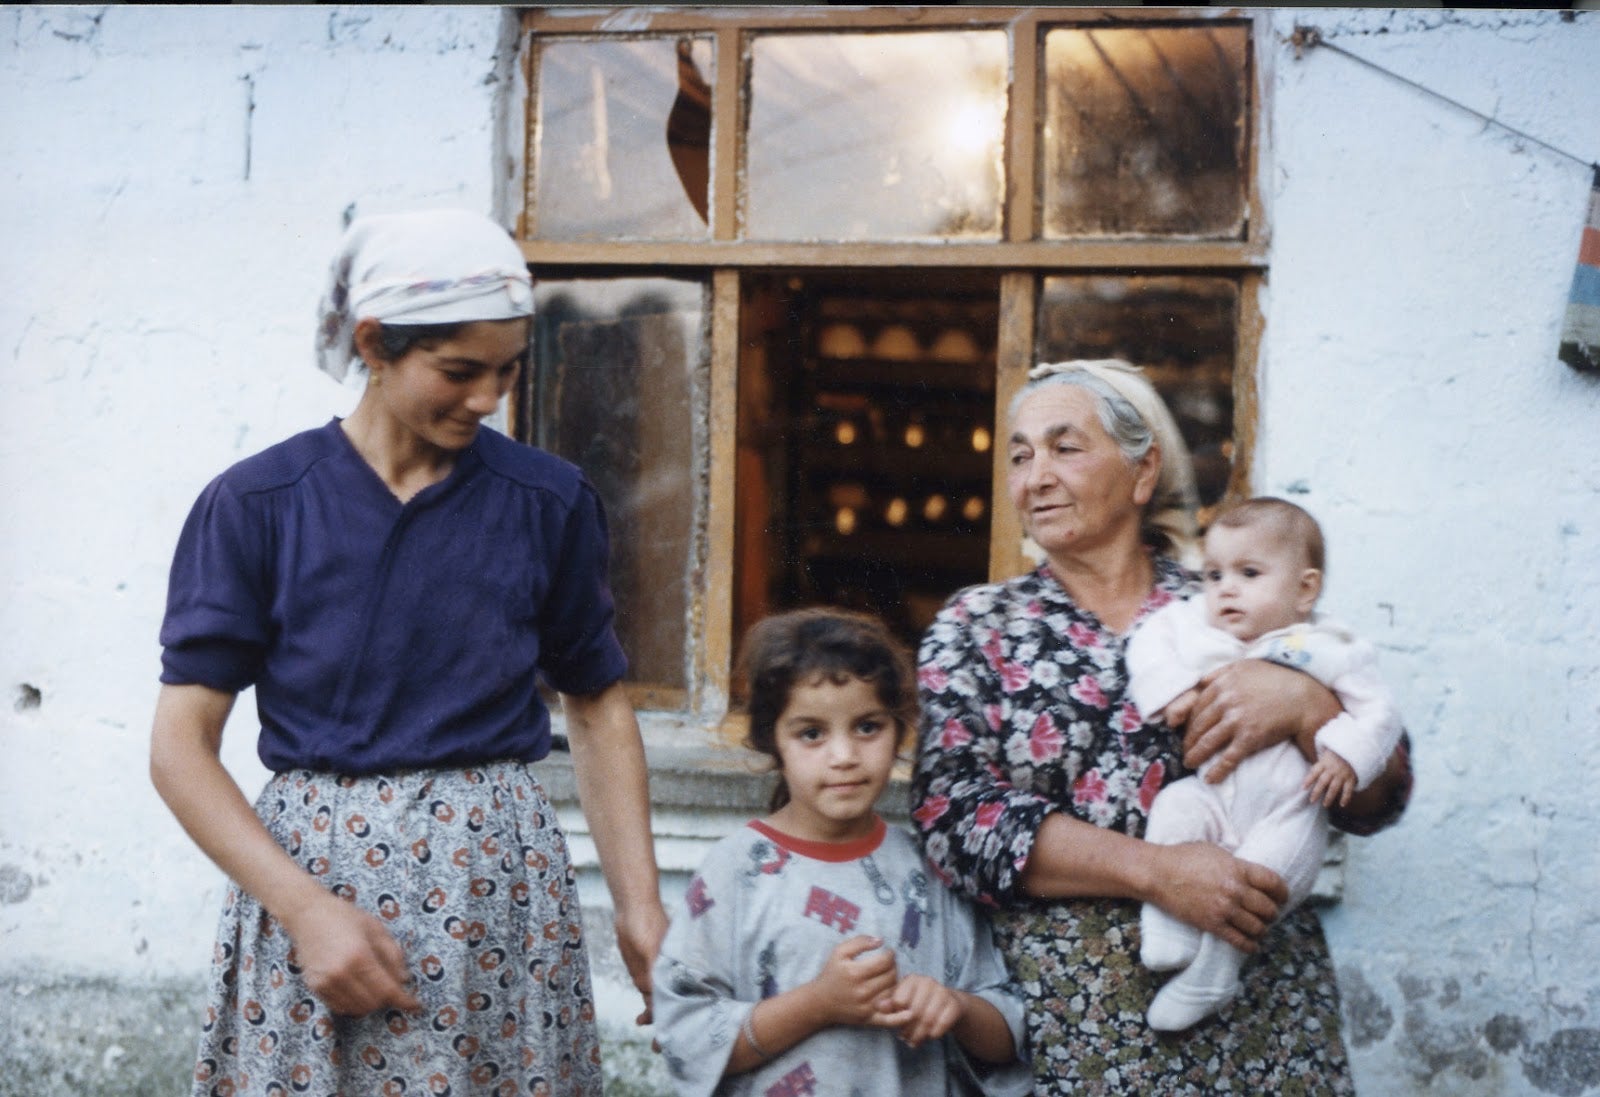 Photograph of a traditional Turkish family: mother, grandmother and two children